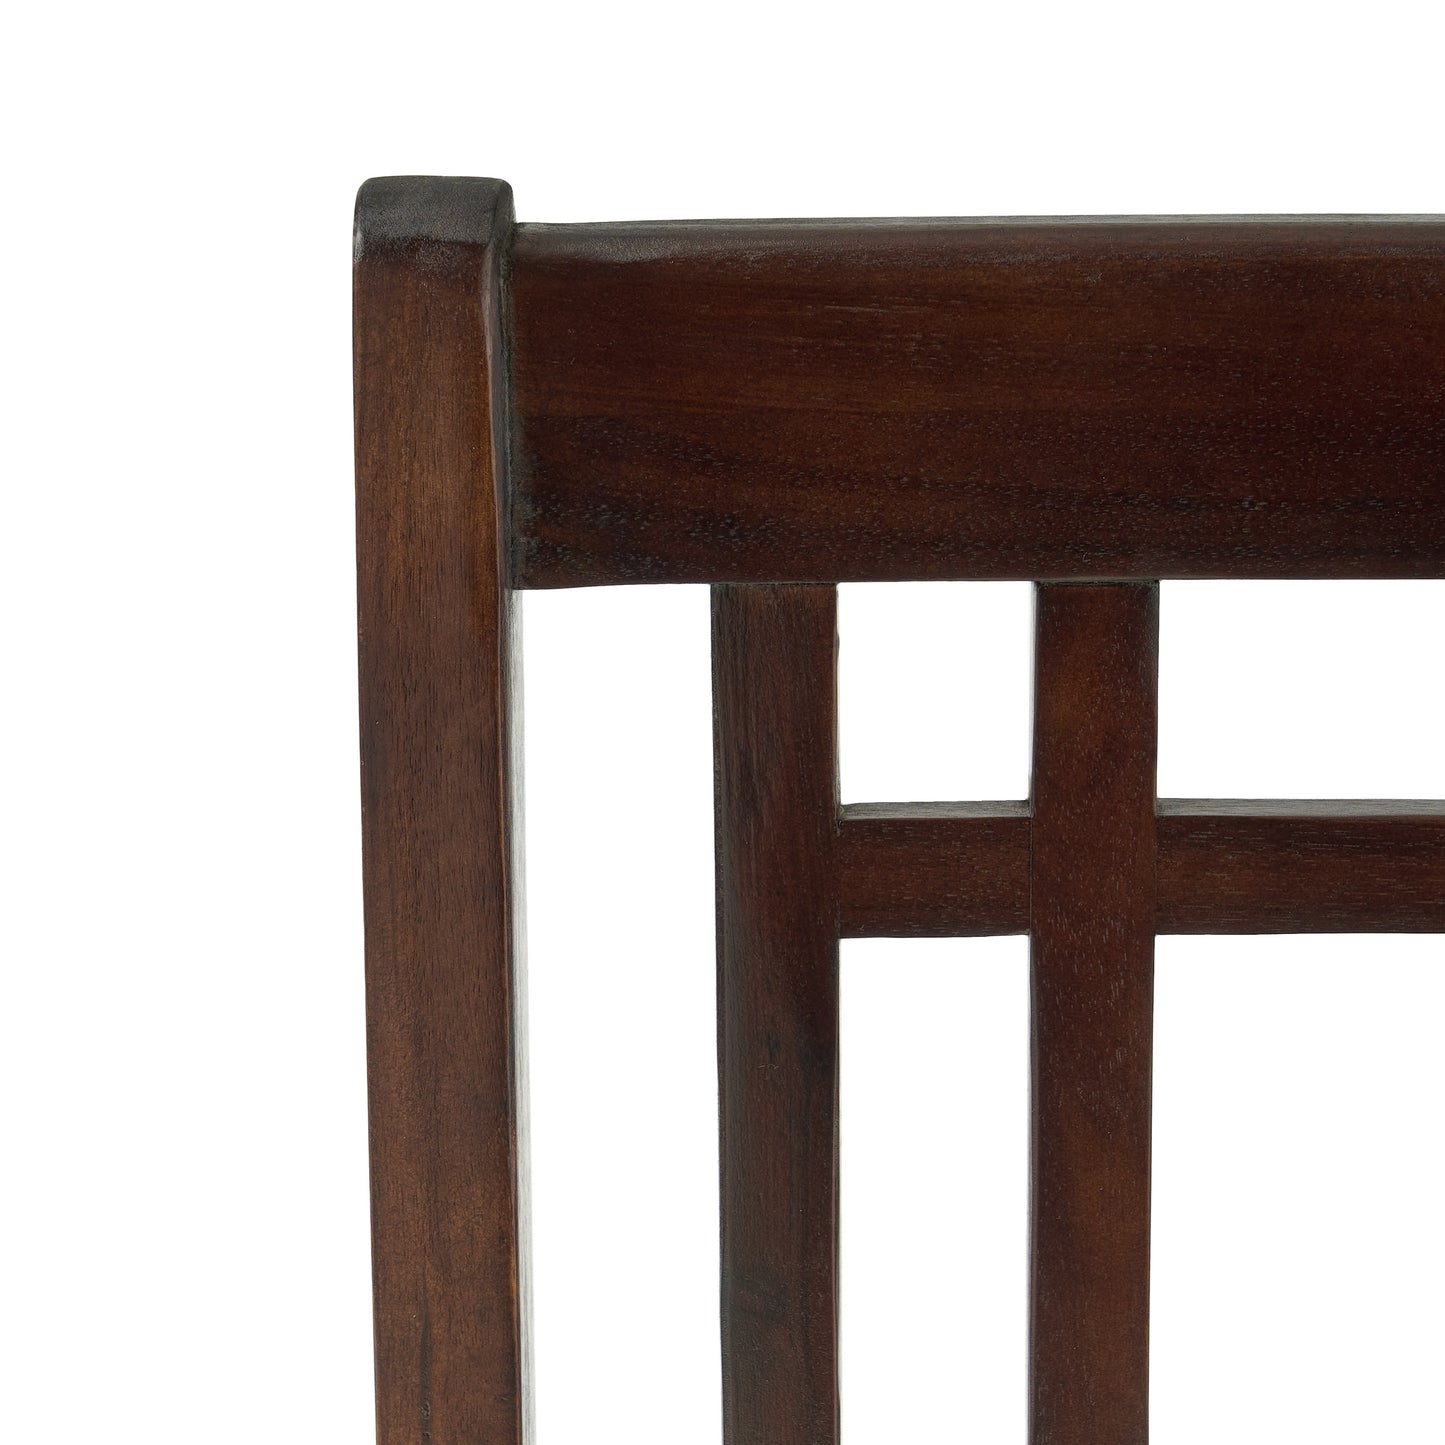 Etodens 26-Inch Brown Mahogany Acacia Counterstool with Beige Cushion (Set of 2)